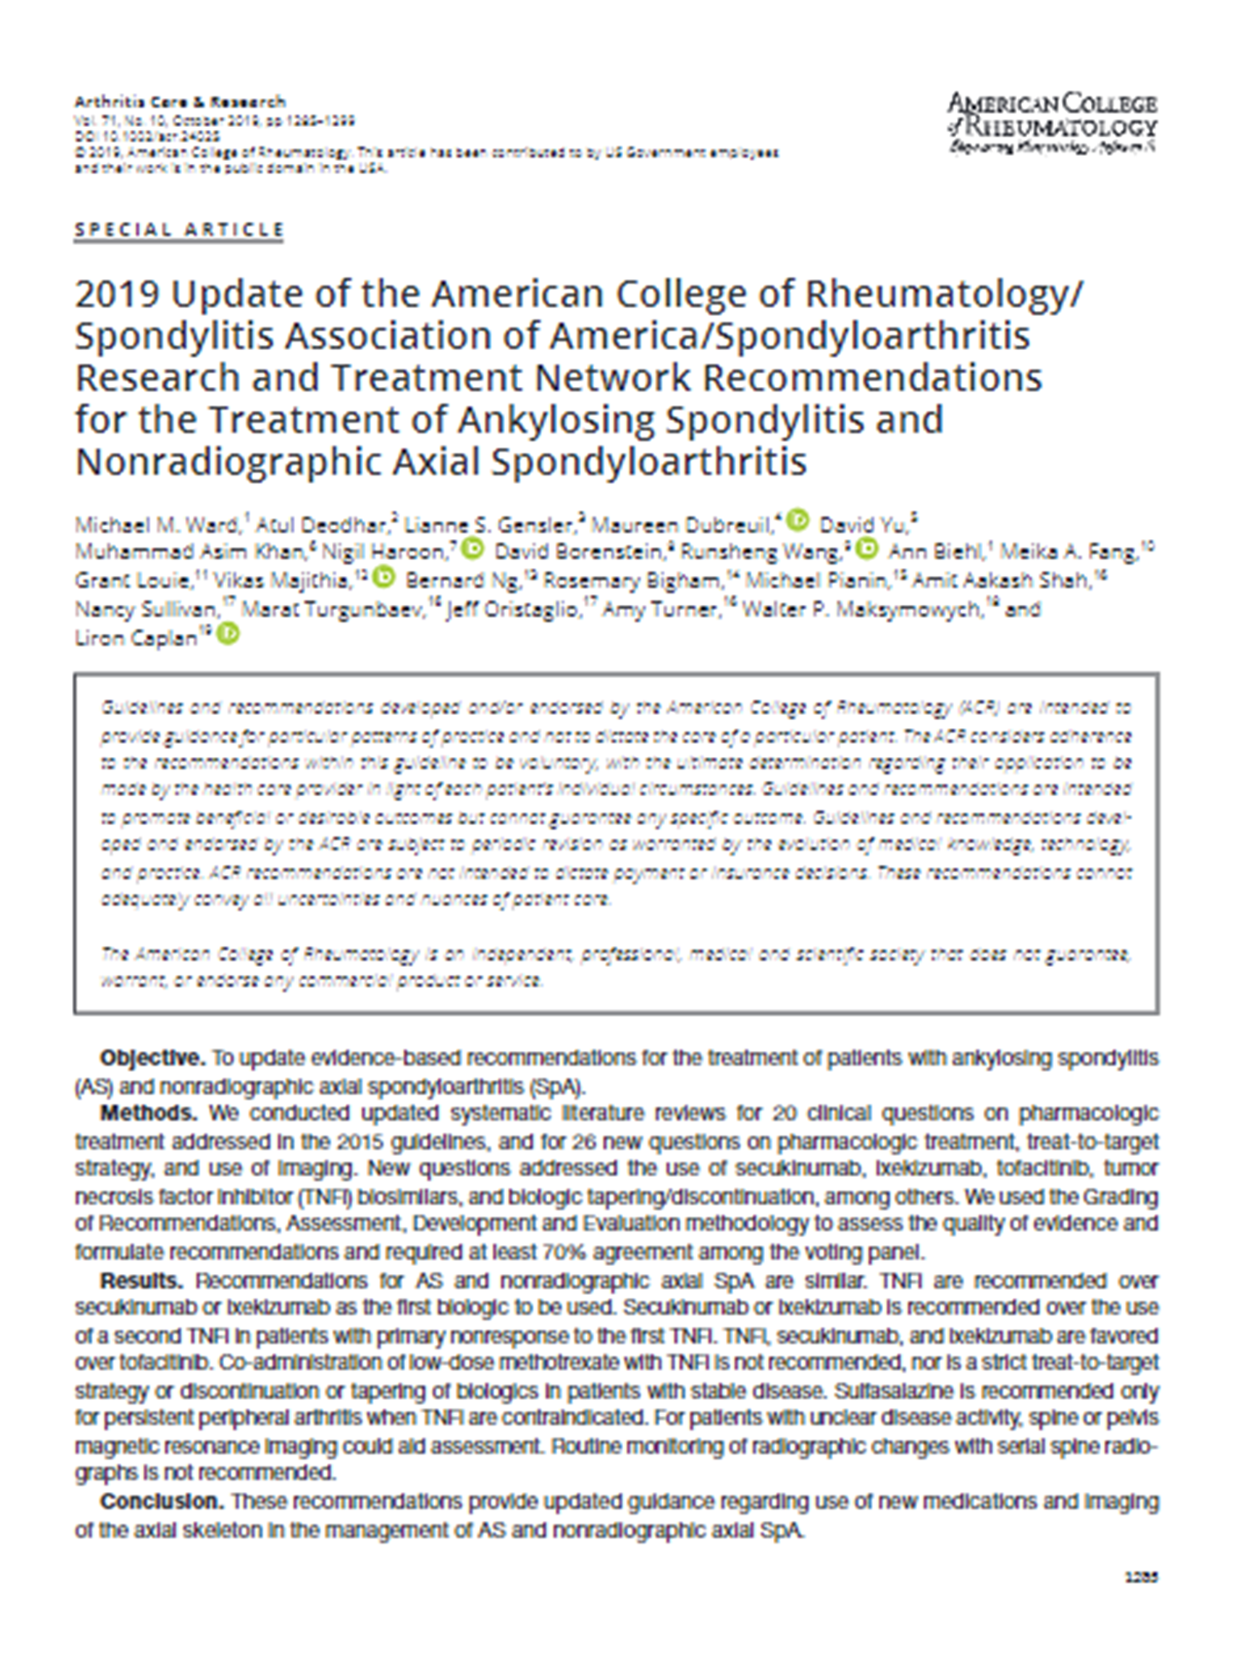 2019 Update of the American College of Rheumatology/ Spondylitis Association of America/Spondyloarthritis Research and Treatment Network Recommendations for the Treatment of Ankylosing Spondylitis and Nonradiographic Axial Spondyloarthritis (ACR 2019)